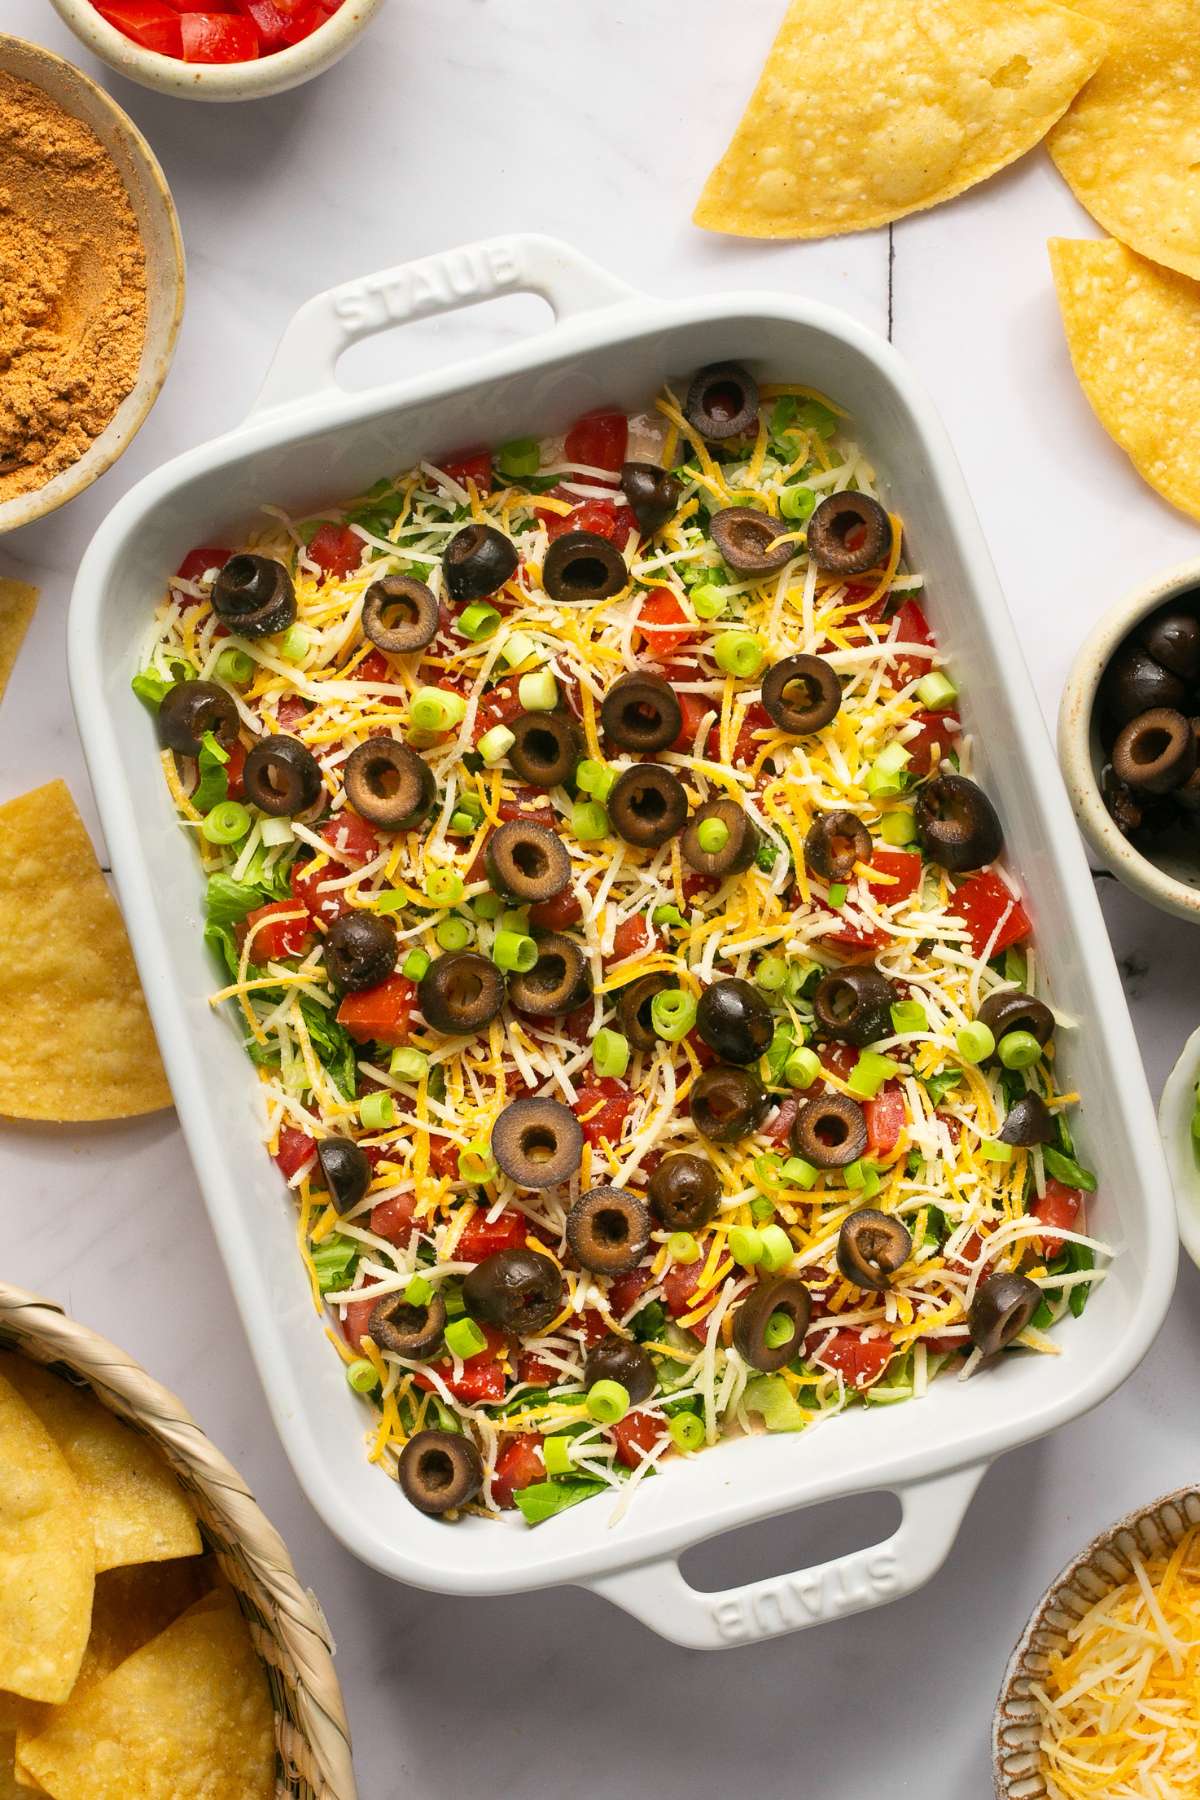 Healthy Taco Dip made with tangy, protein packed Greek Yogurt & homemade taco seasoning! Your guests will have no idea this flavorful party dip is healthy! Gluten Free + Low Calorie